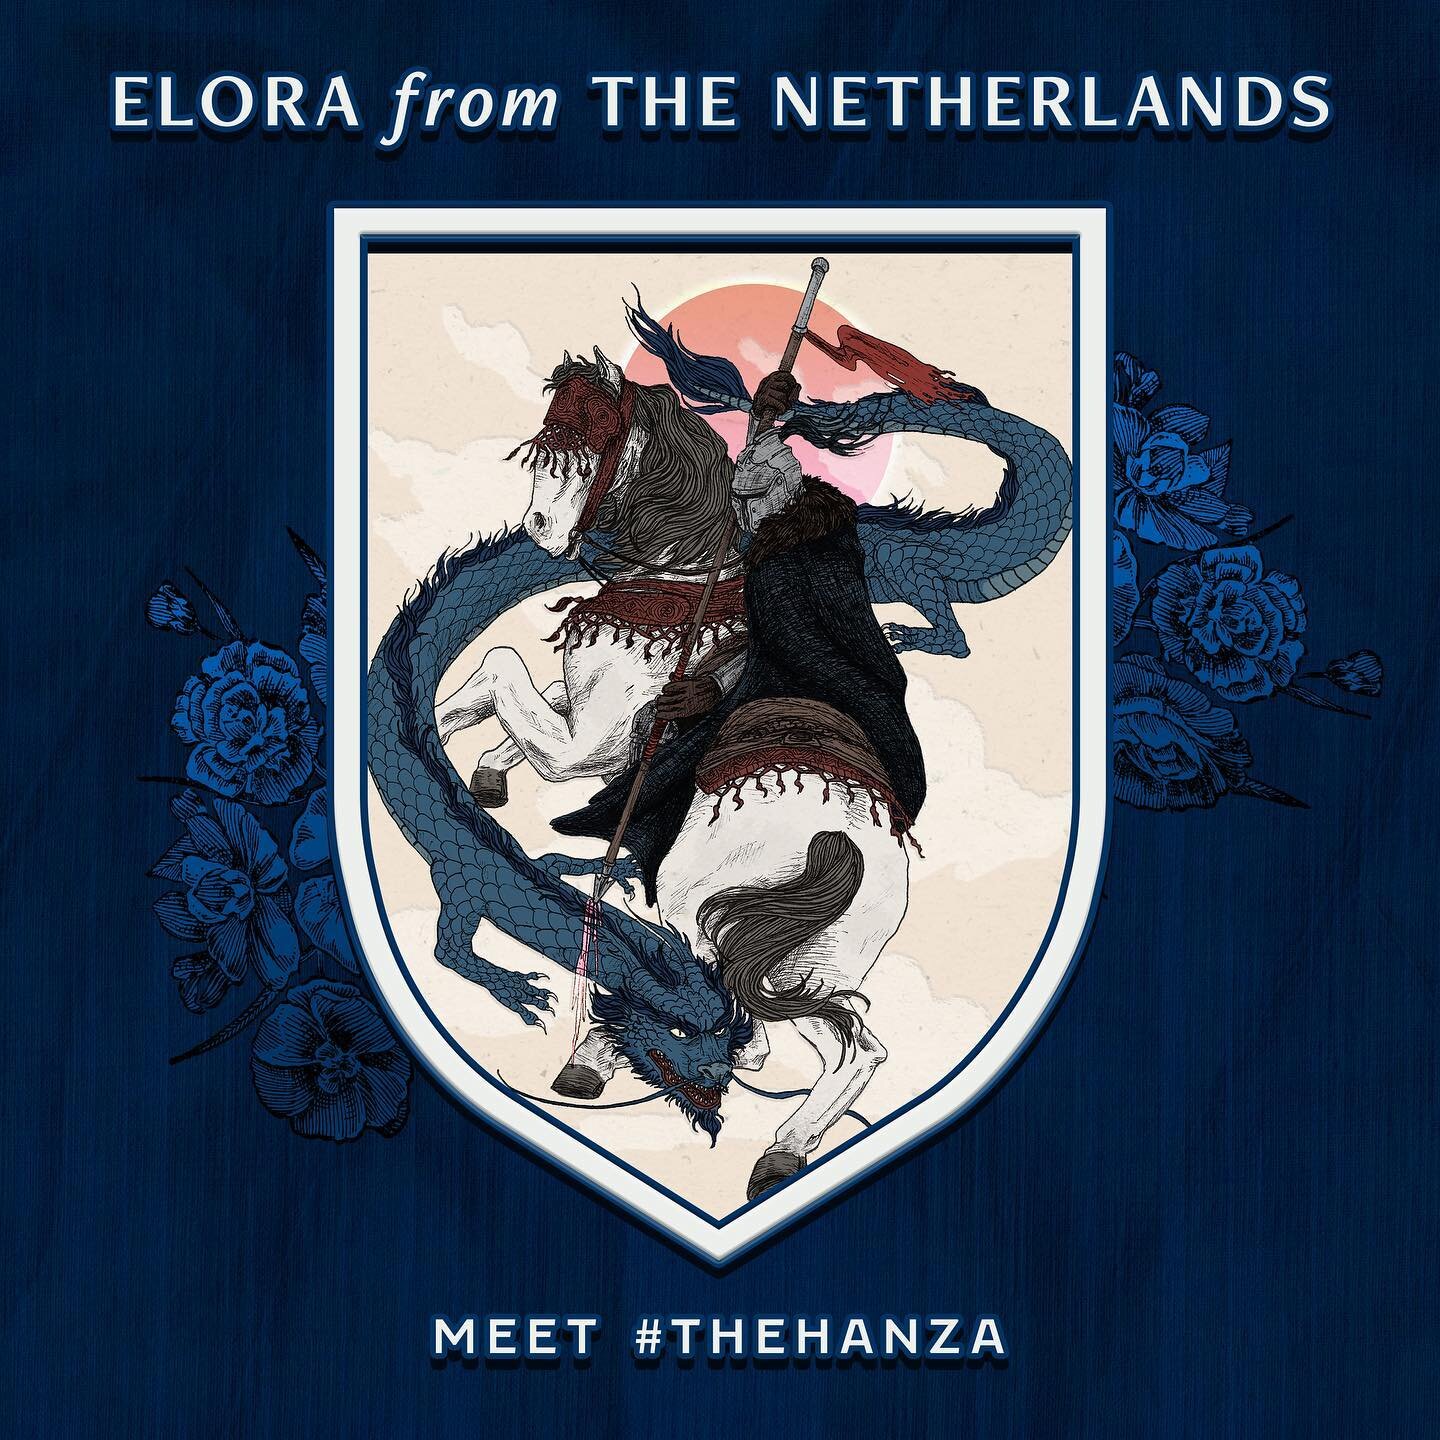 Meet #thehanza: featuring @elorasperber from the Netherlands!
.
You&rsquo;ll recognize Elora from Ep. 27 &ndash; &ldquo;Before A Fall&rdquo; and from the European D&amp;D game as Dagna, the dwarven druid. See her beautiful illustrations in Peter Kenn